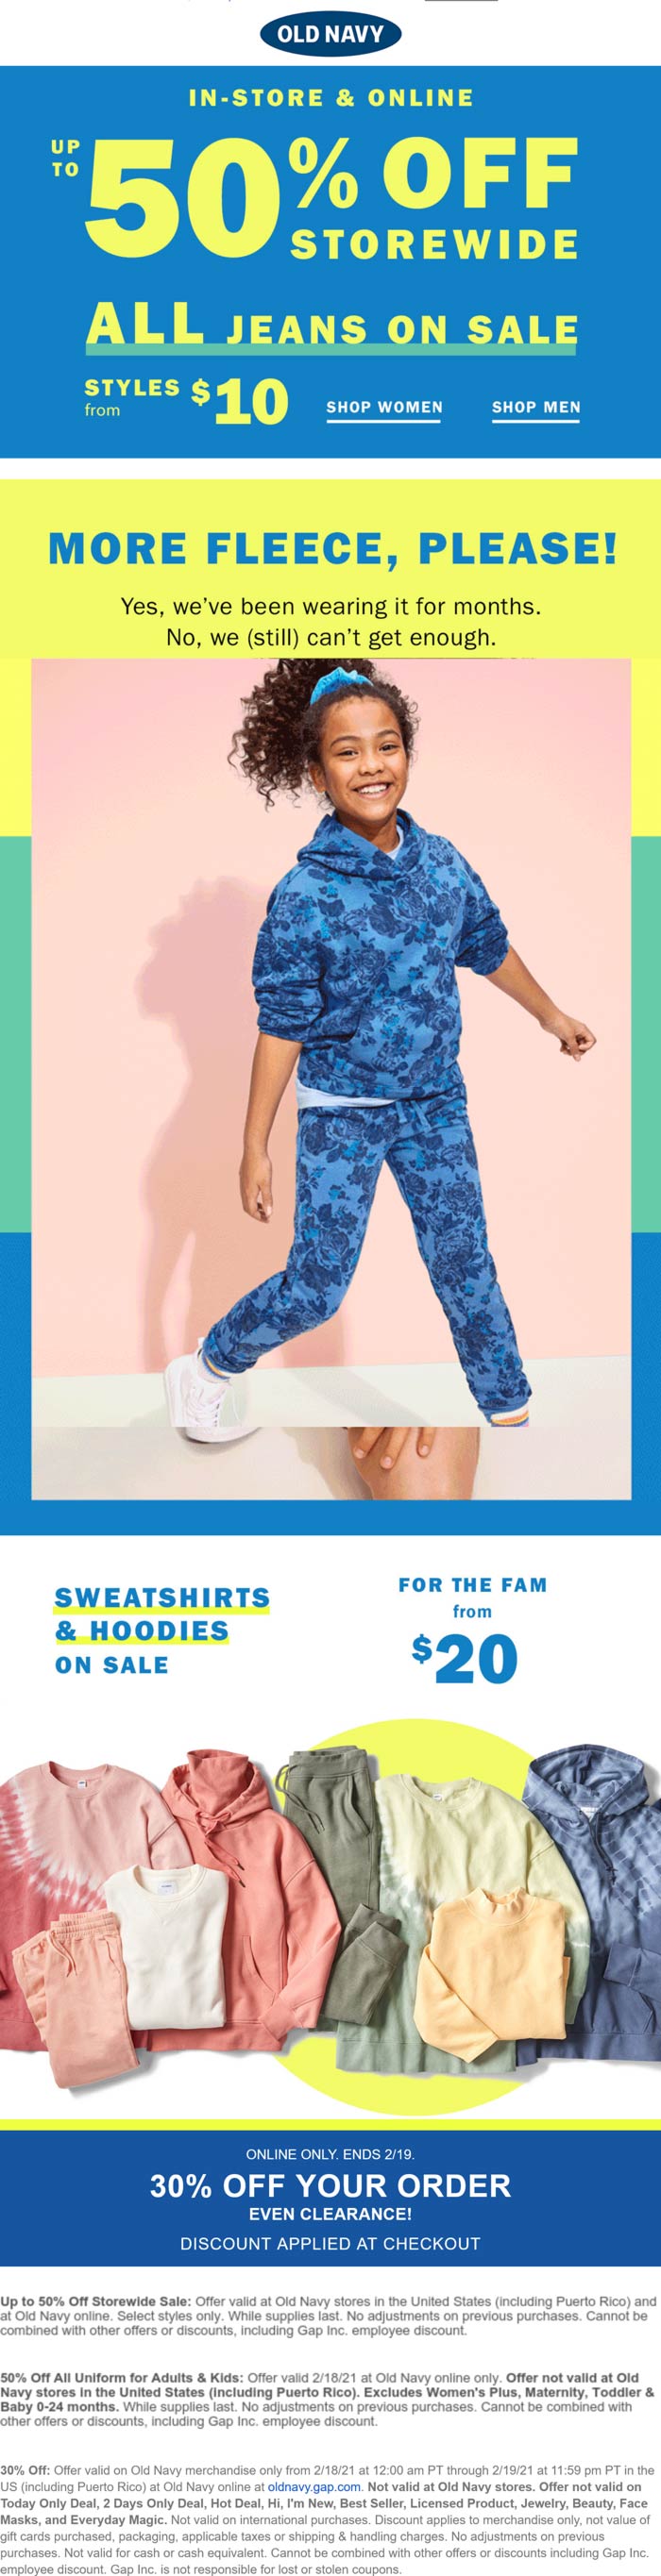 Old Navy stores Coupon  30% off online at Old Navy, includes clearance #oldnavy 